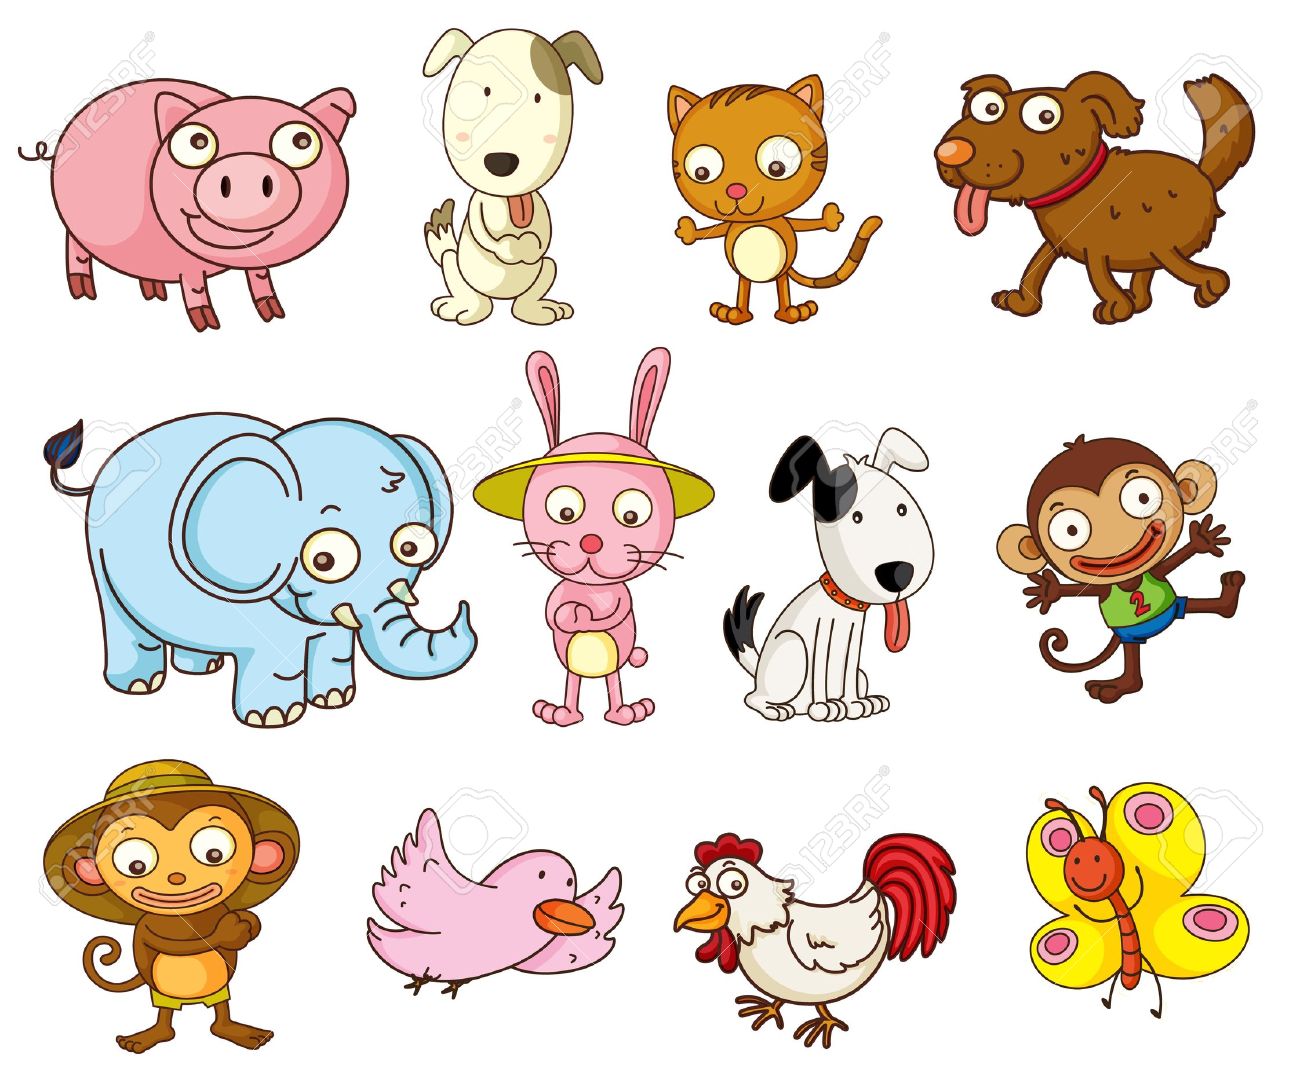 Clipart animals pictures.